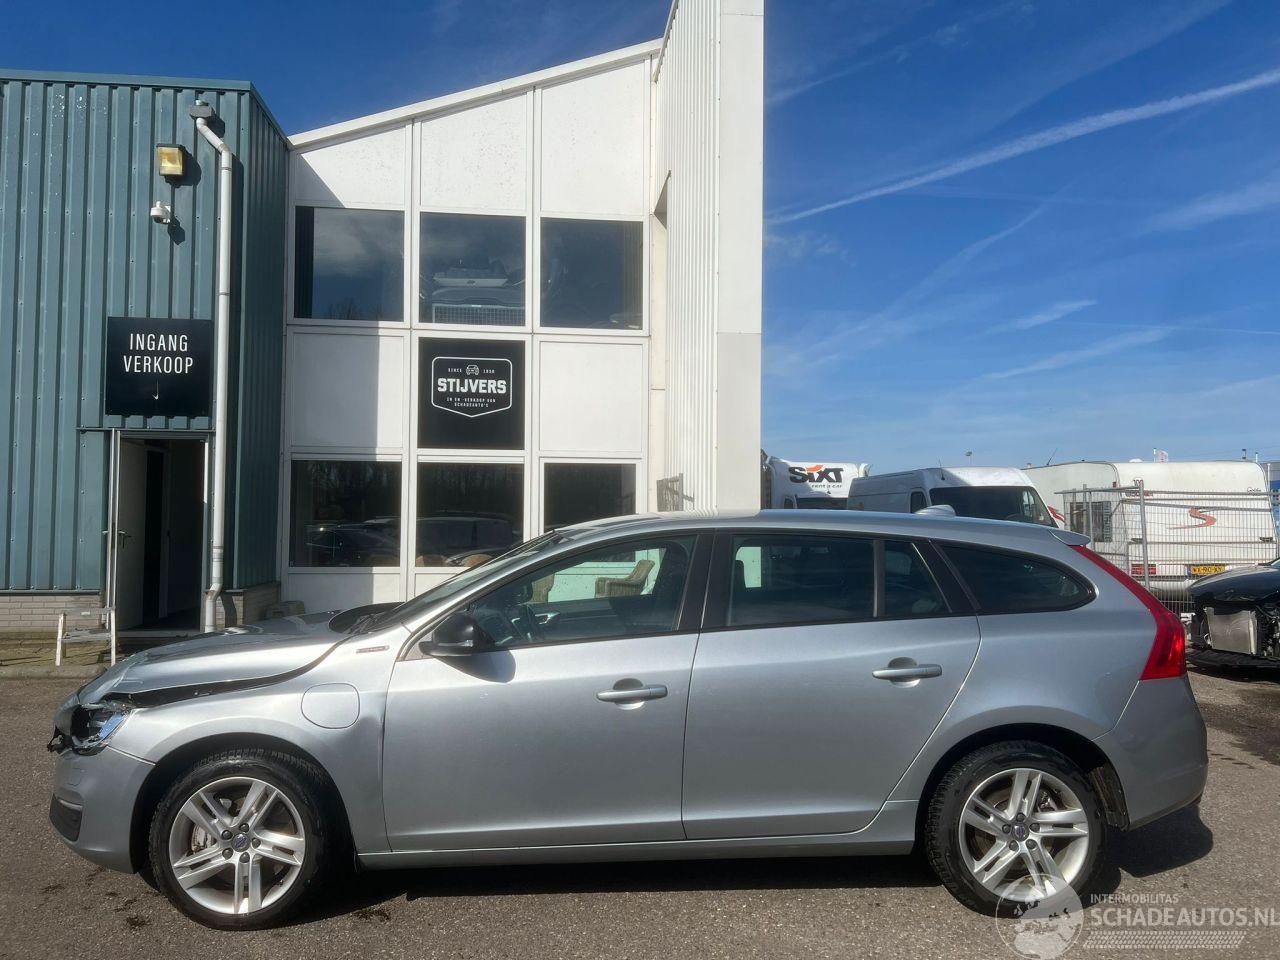 Volvo V-60 2.4 D5 TWIN ENGINE AUTOMAAT BJ 2016